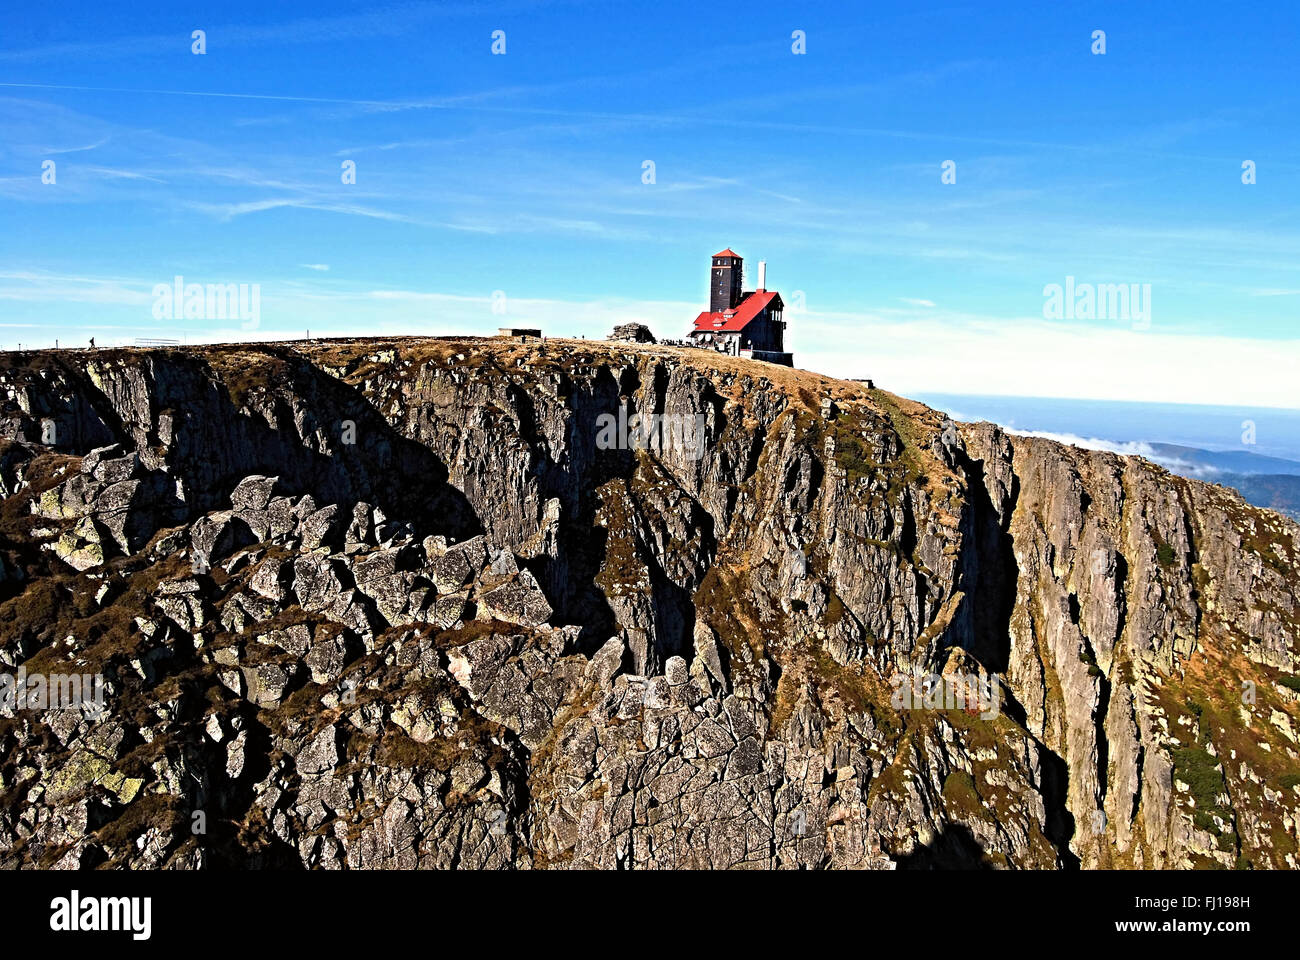 most wilderness hill in Karkonosze mountains - Sniezne Kotly  during nice autumn day with clear sky Stock Photo